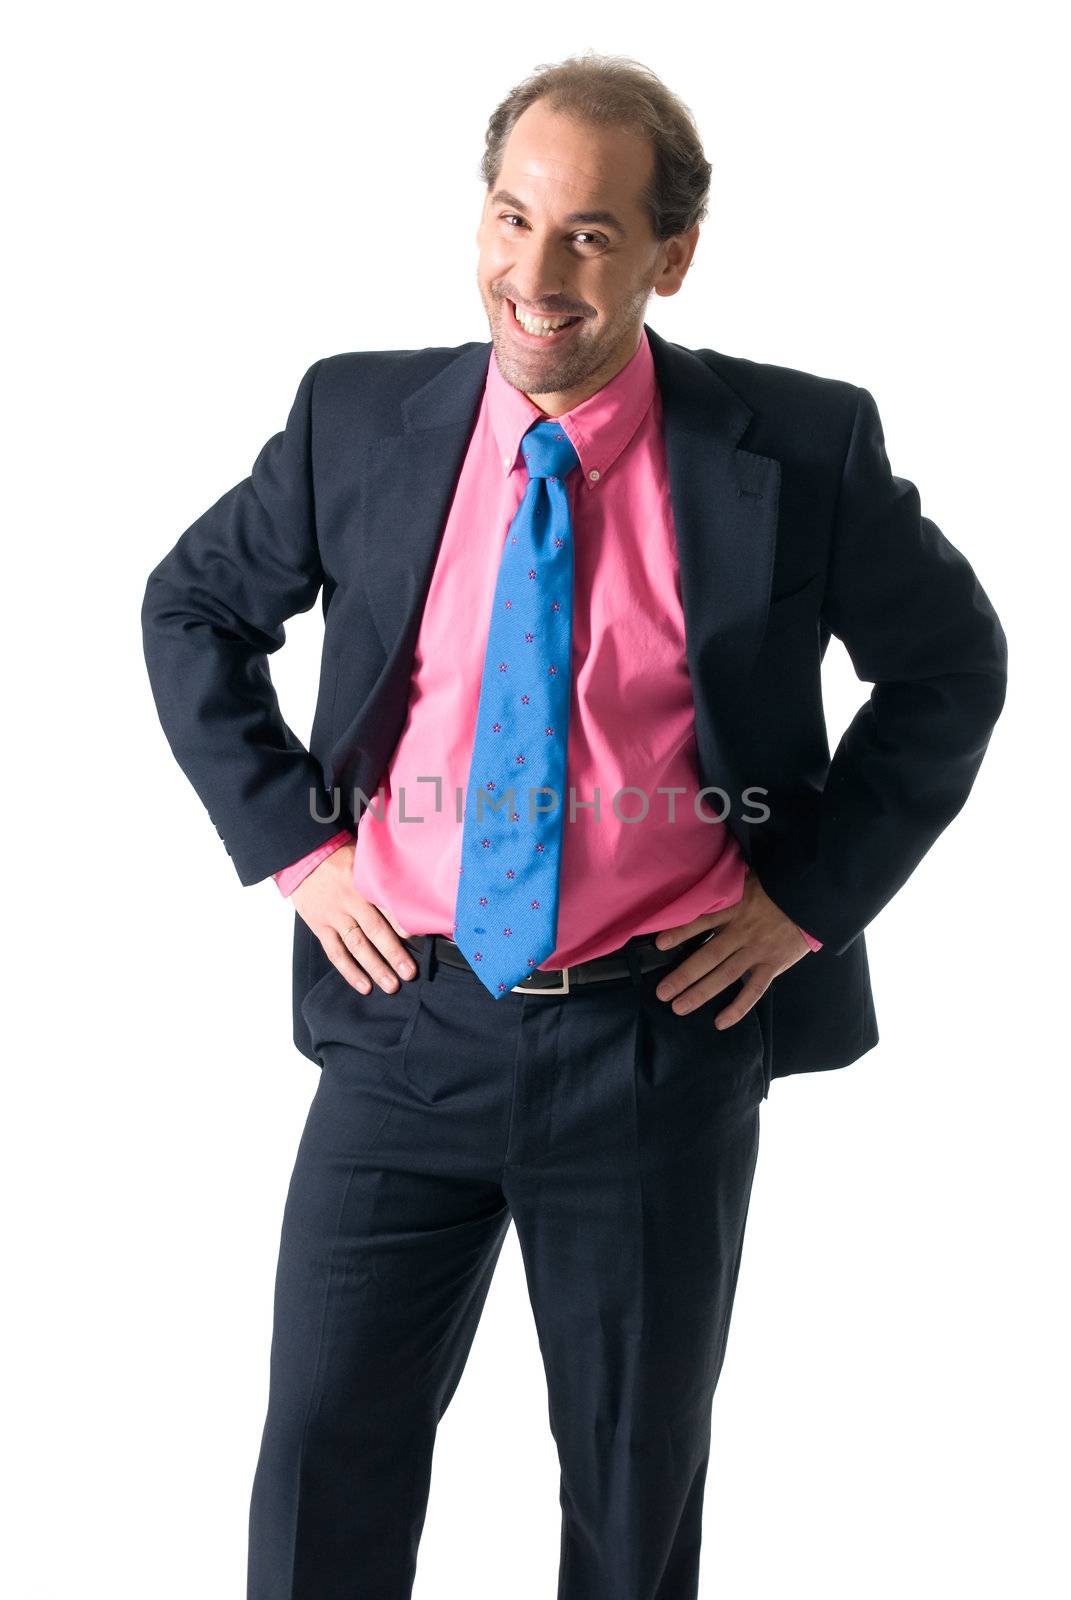 Businessman laughing on white background by dgmata